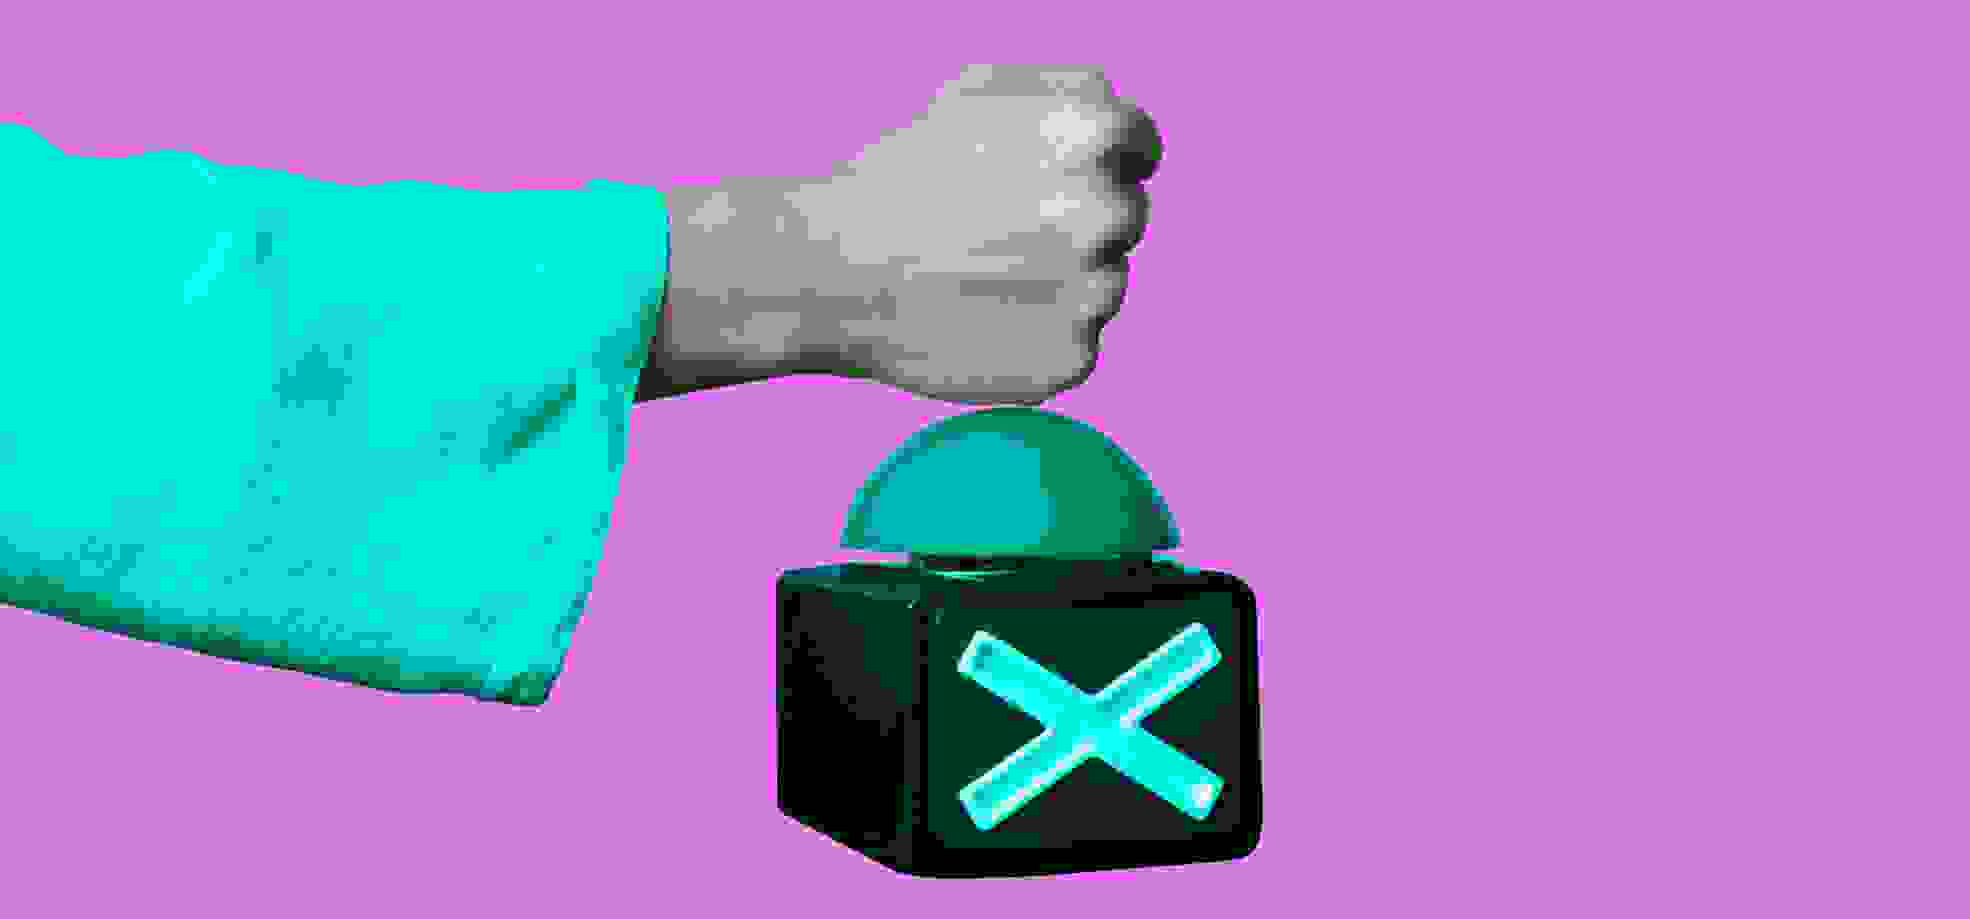 the fist is lowered on the button with the symbol of the cross